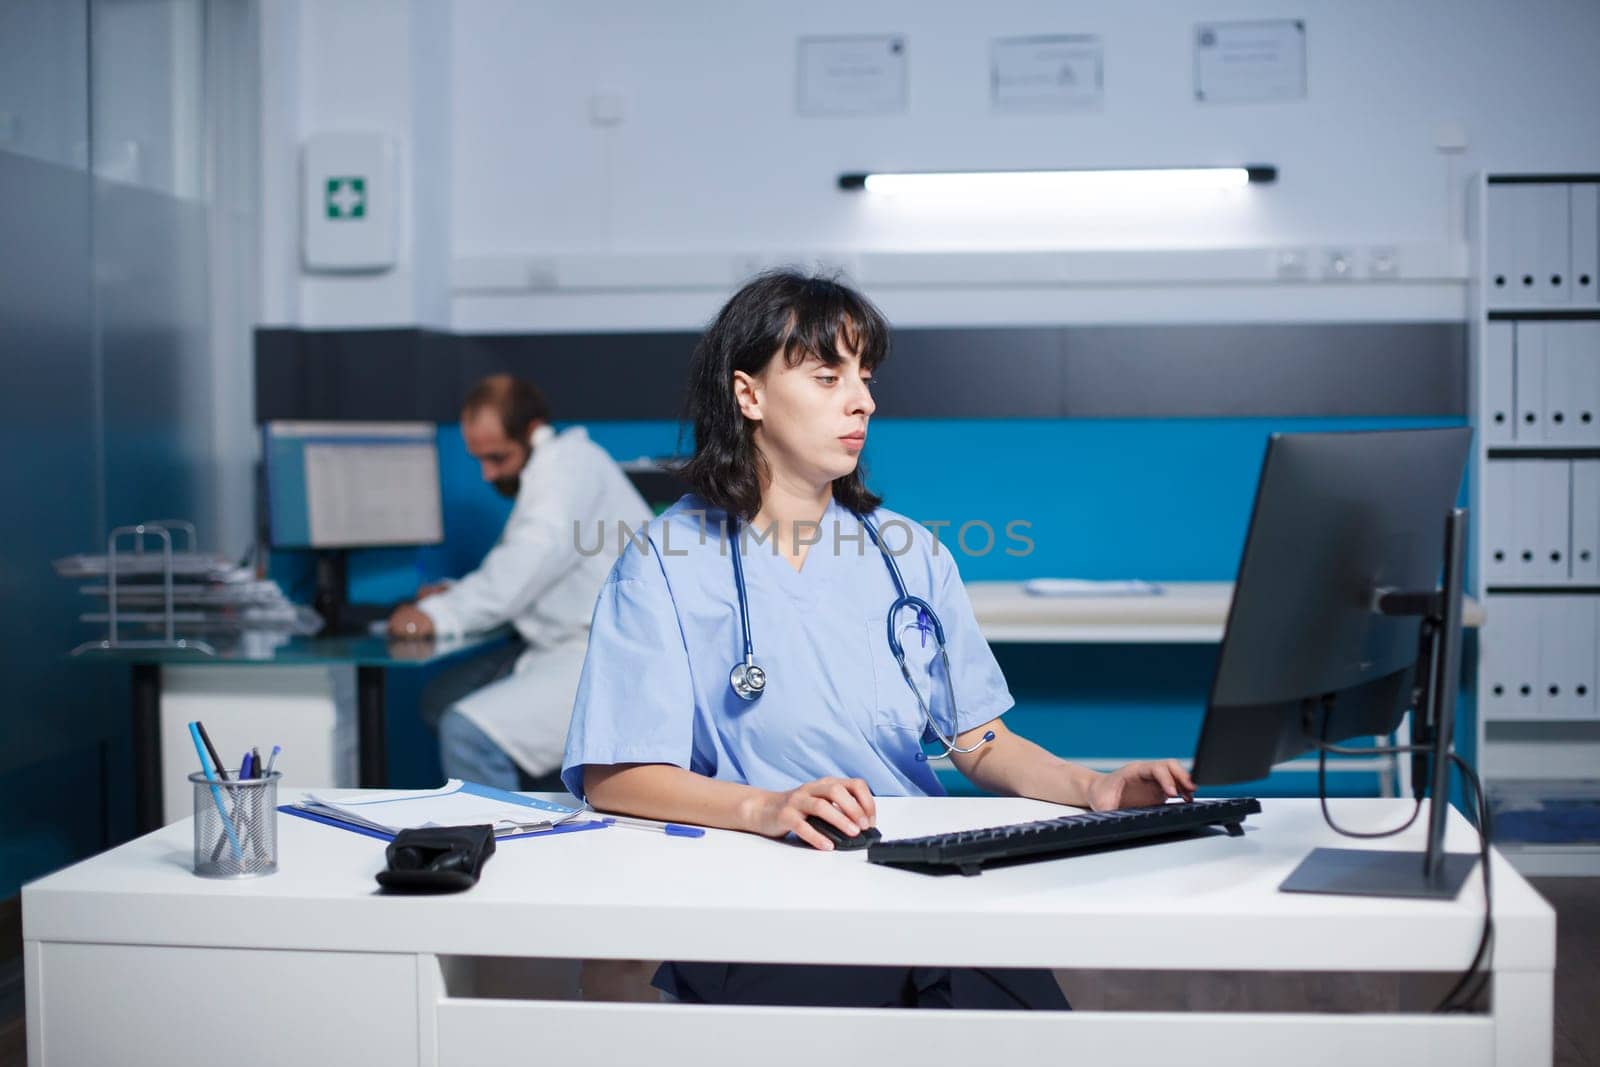 Cucasian practitioner is typing a medical report at a desk in a hospital office late at night. Female nurse preparing medical care while assessing patient illness symptoms.